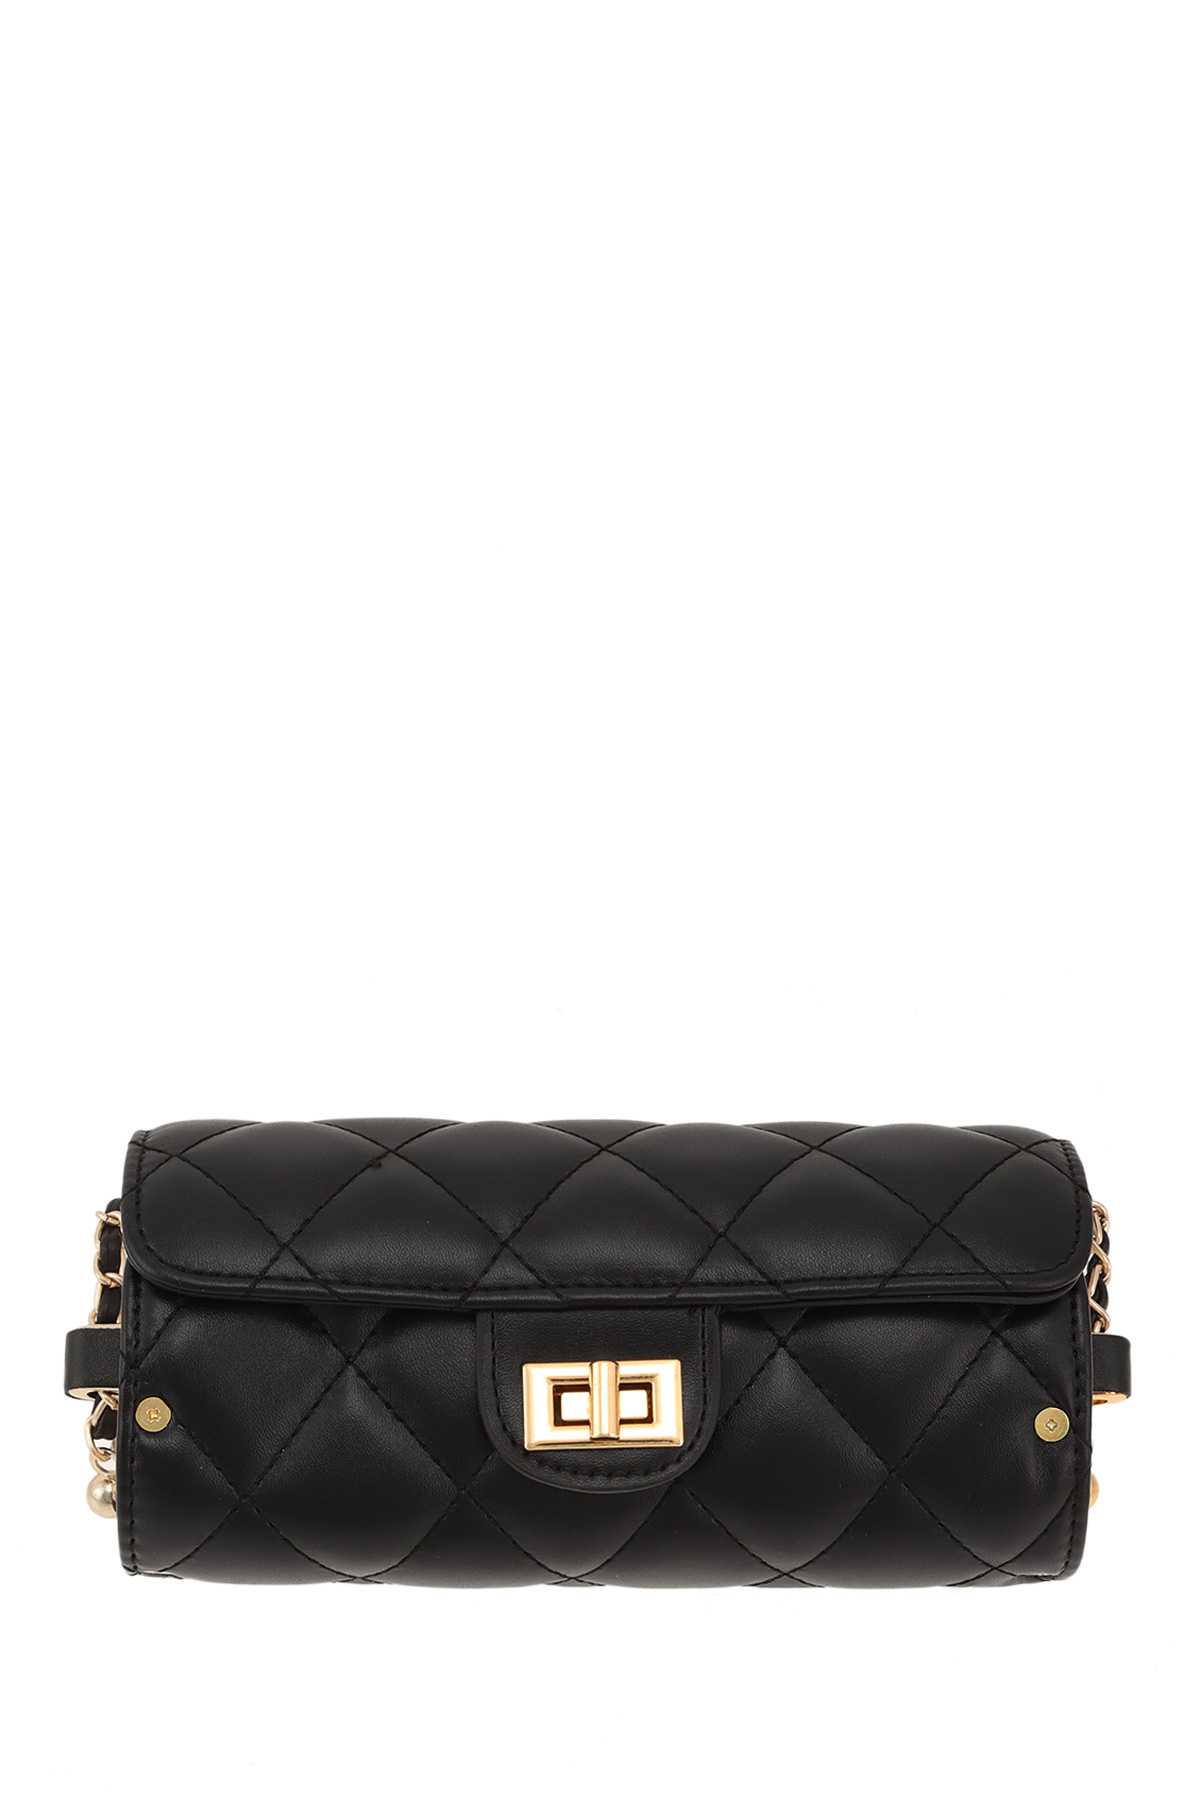 DIAMOND QUILTED CYLINDER SHAPE CROSSBODY BAG